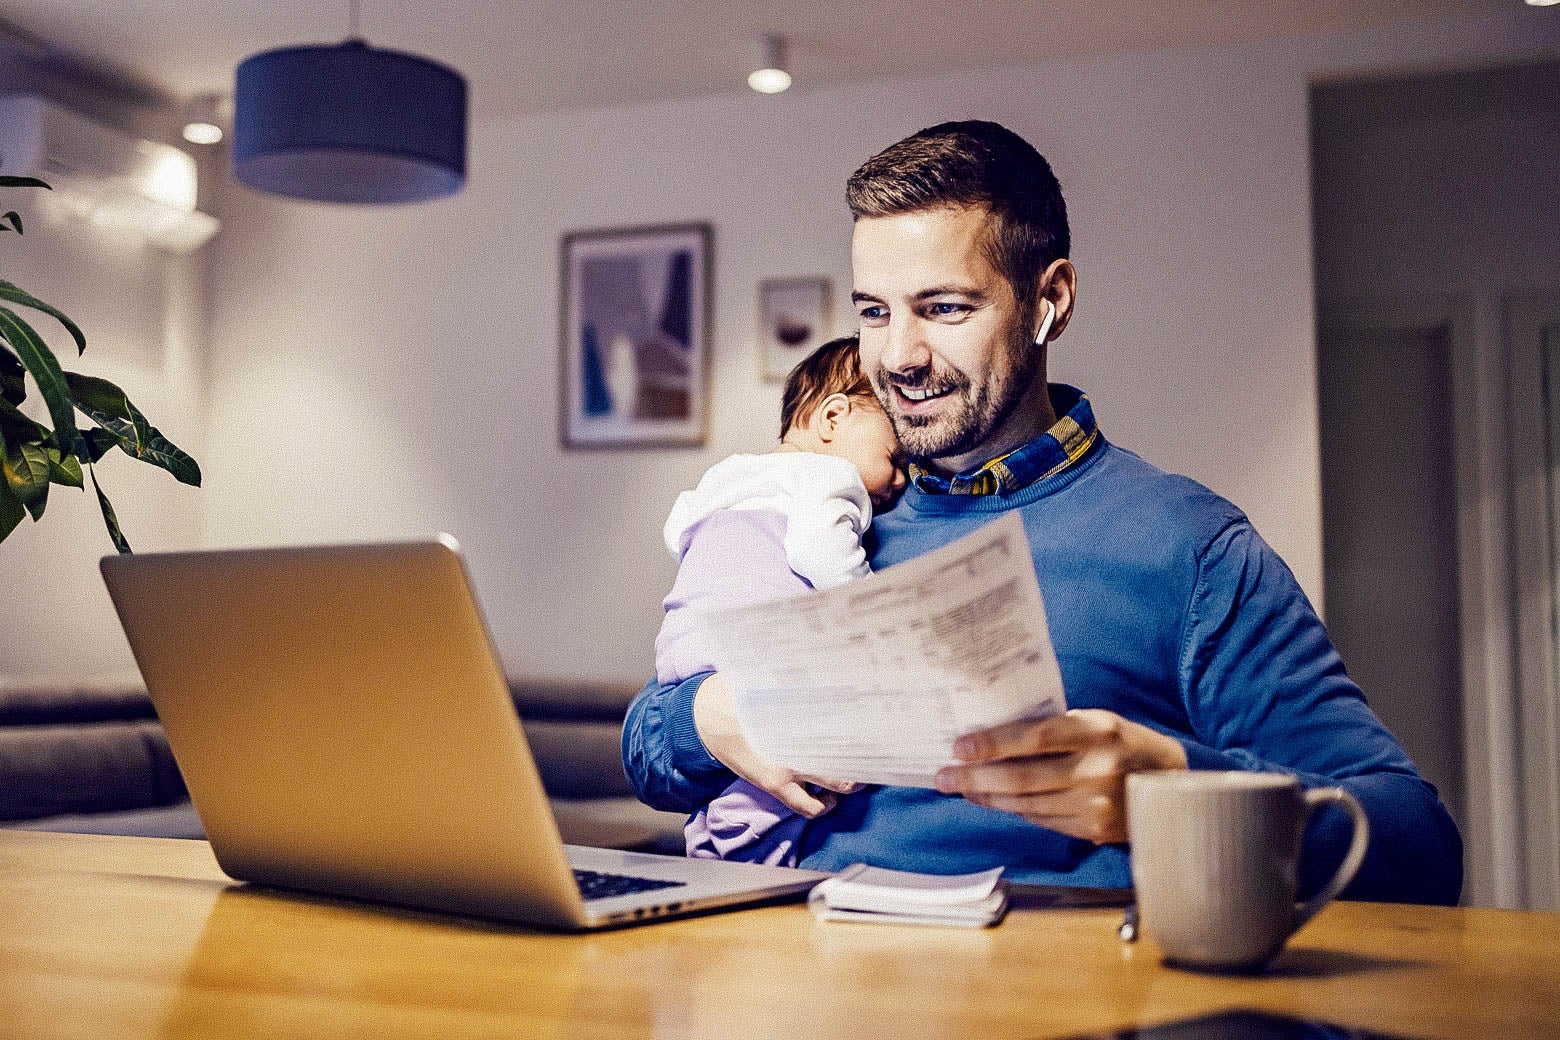 A dad smiles as he works from home sitting in front of a laptop with a baby on his shoulder and a paper in his other hand